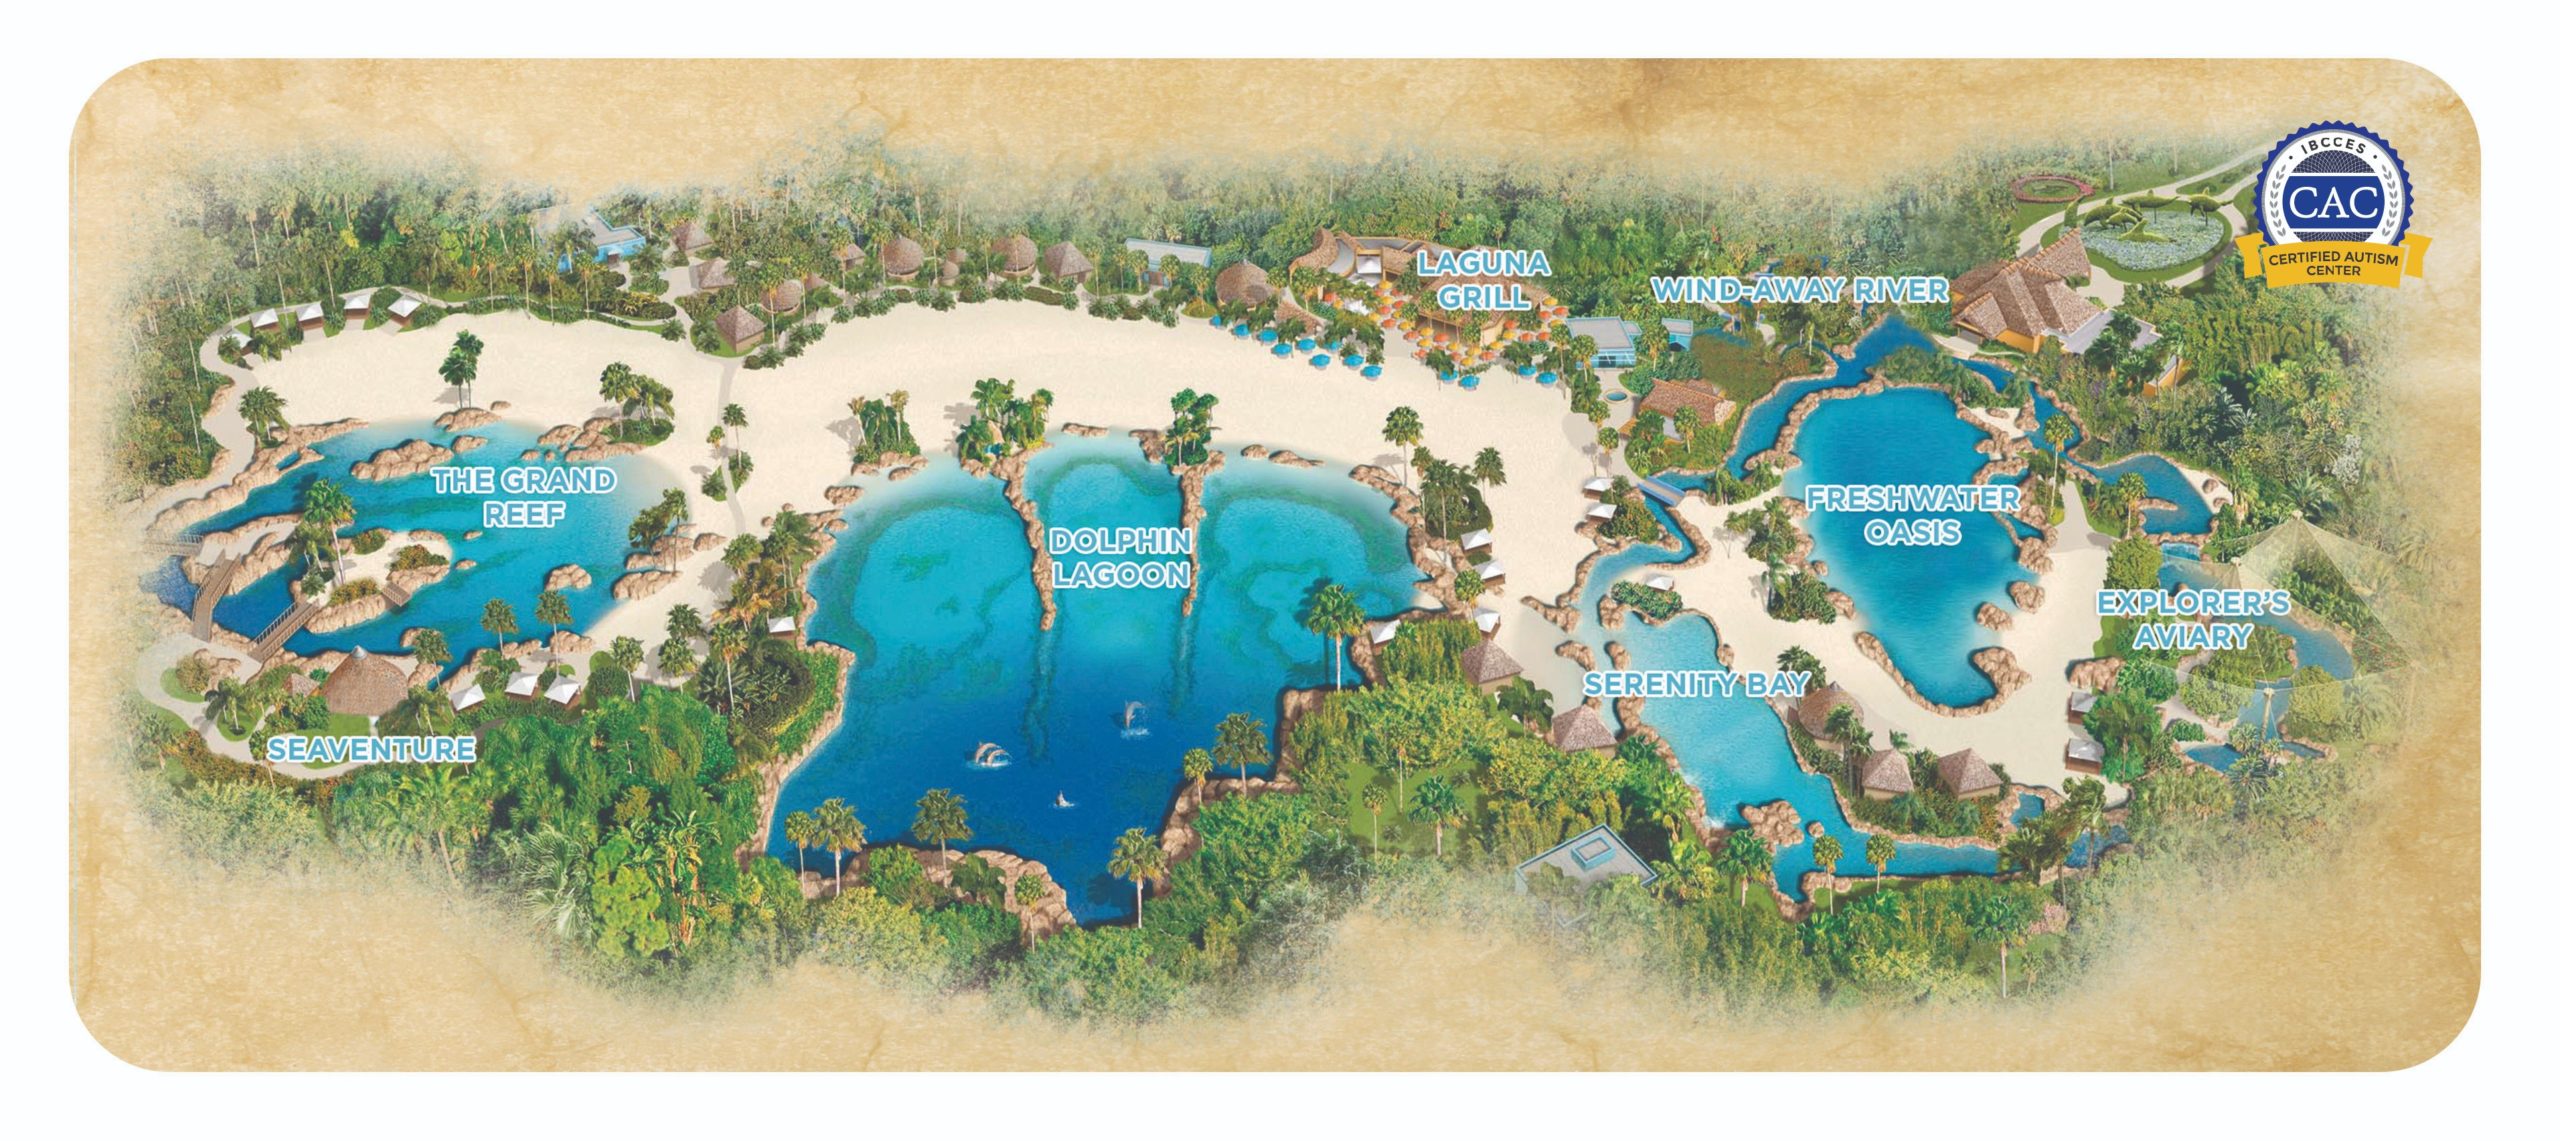 Discovery Cove park map